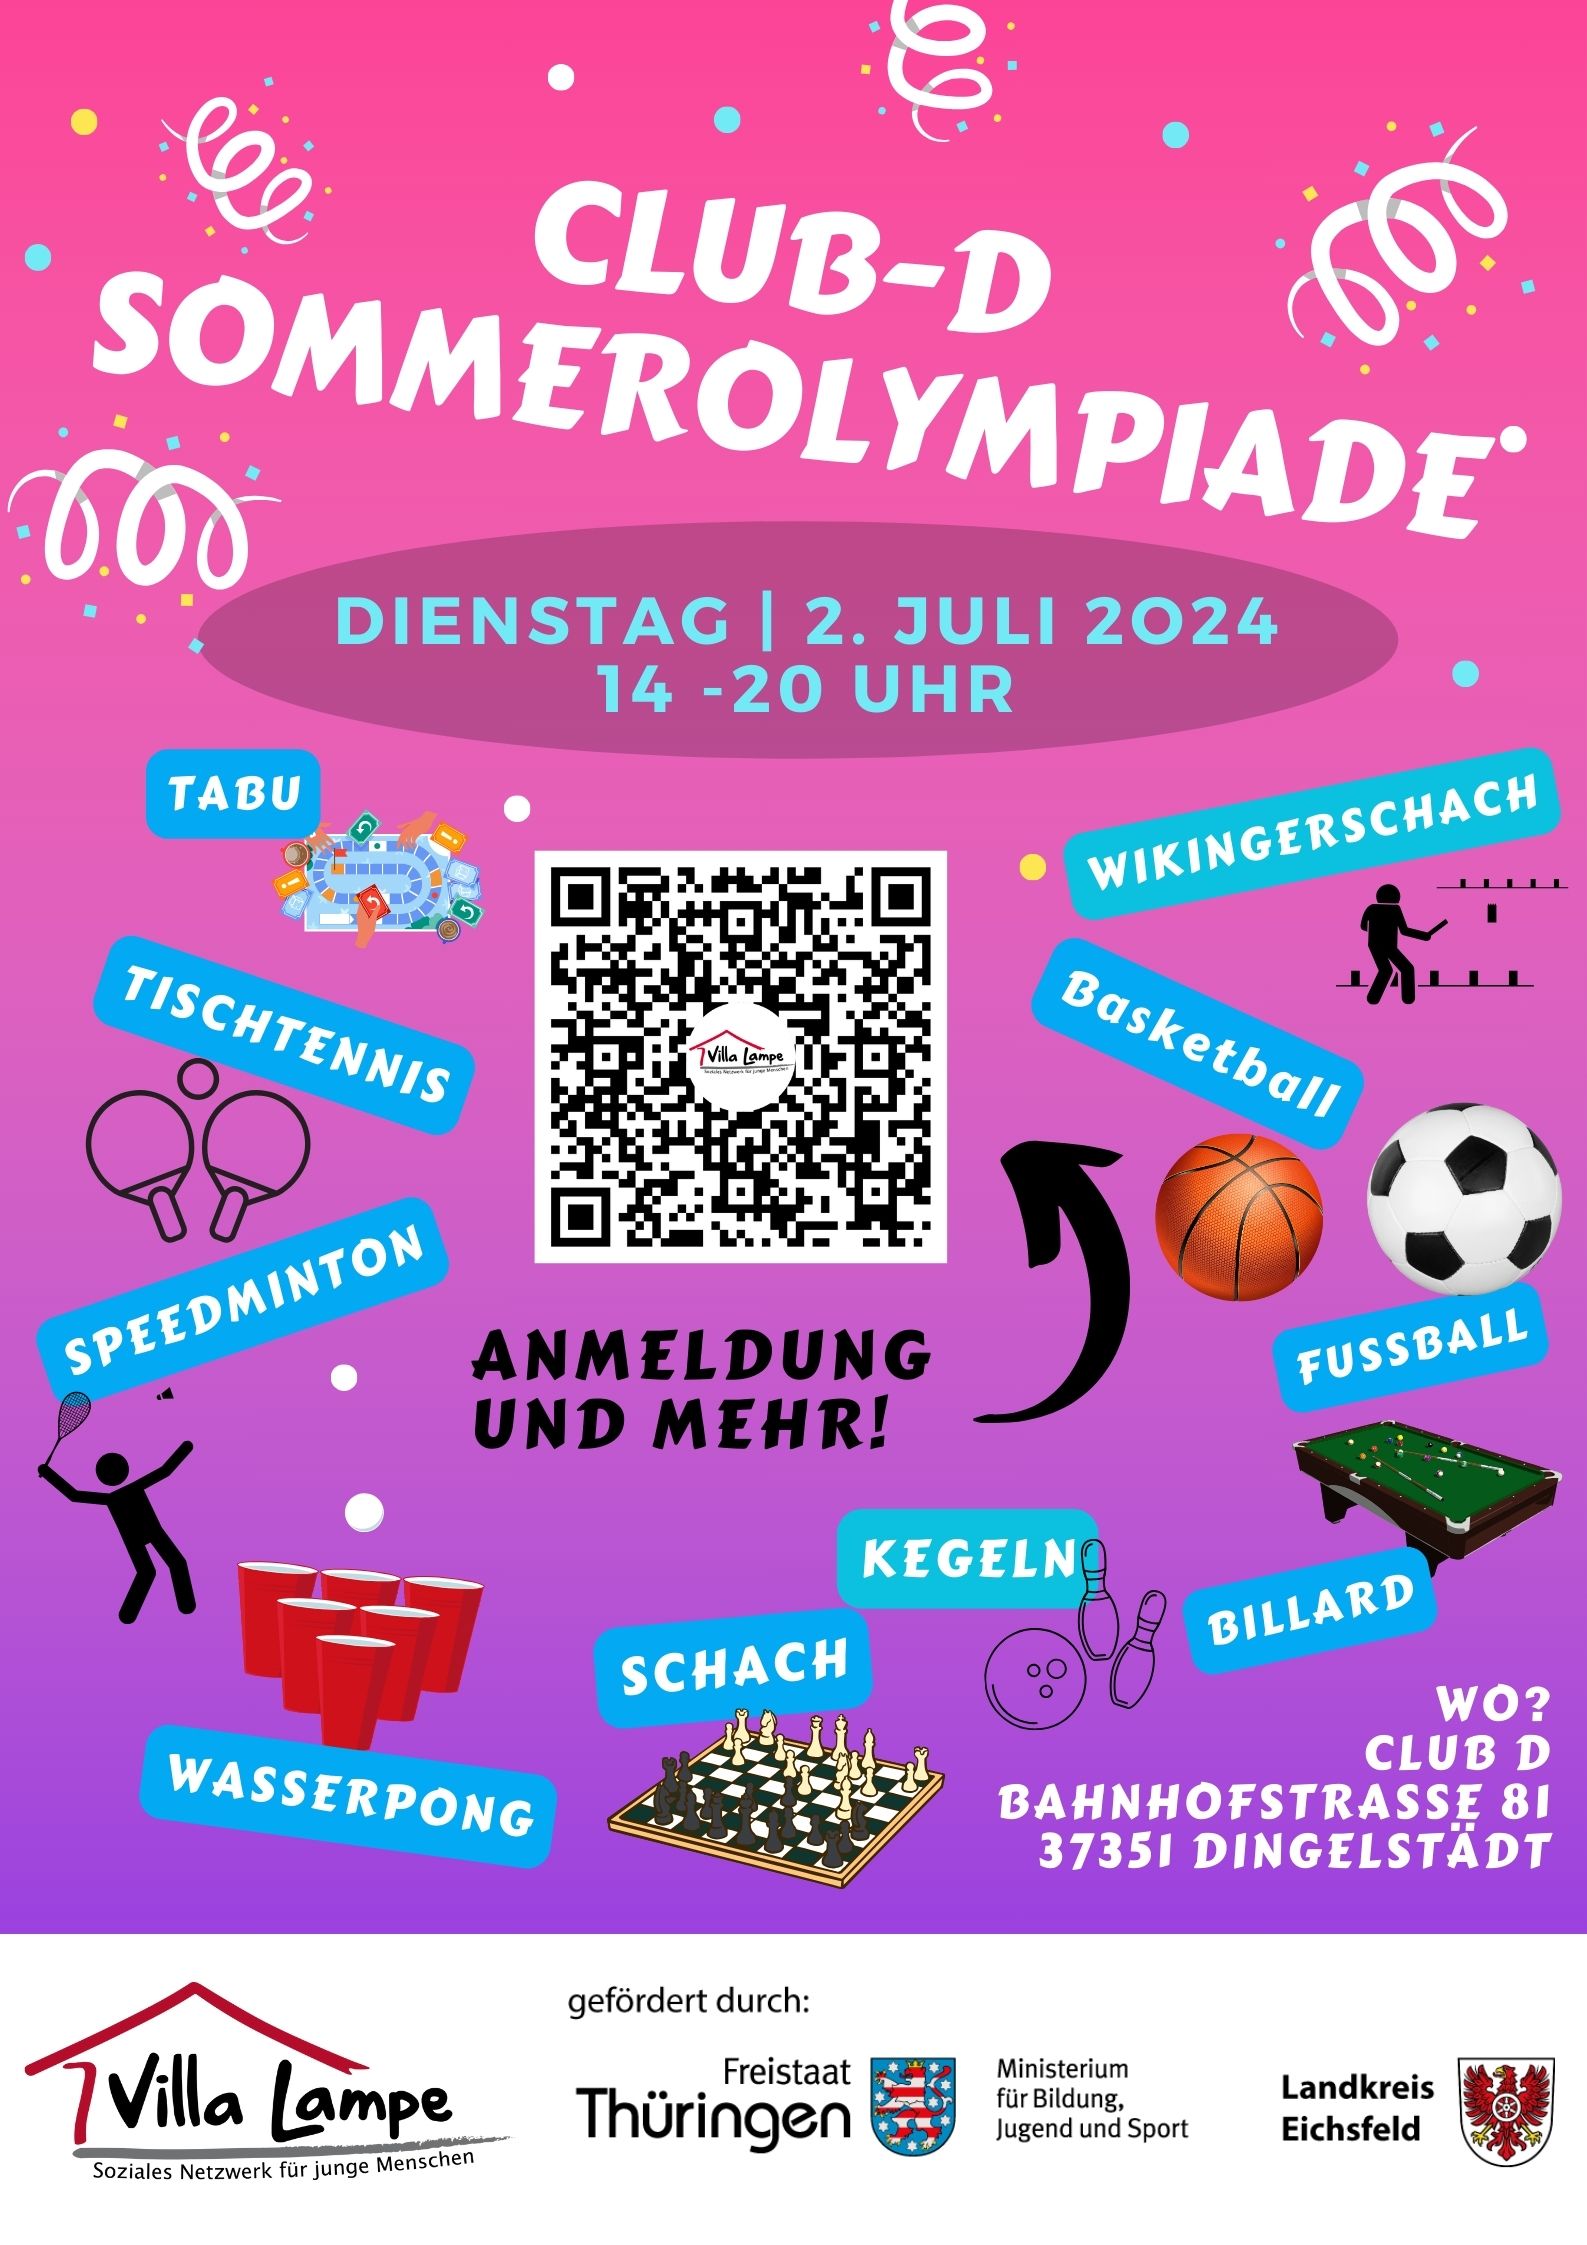 Club-D Sommerolympiade